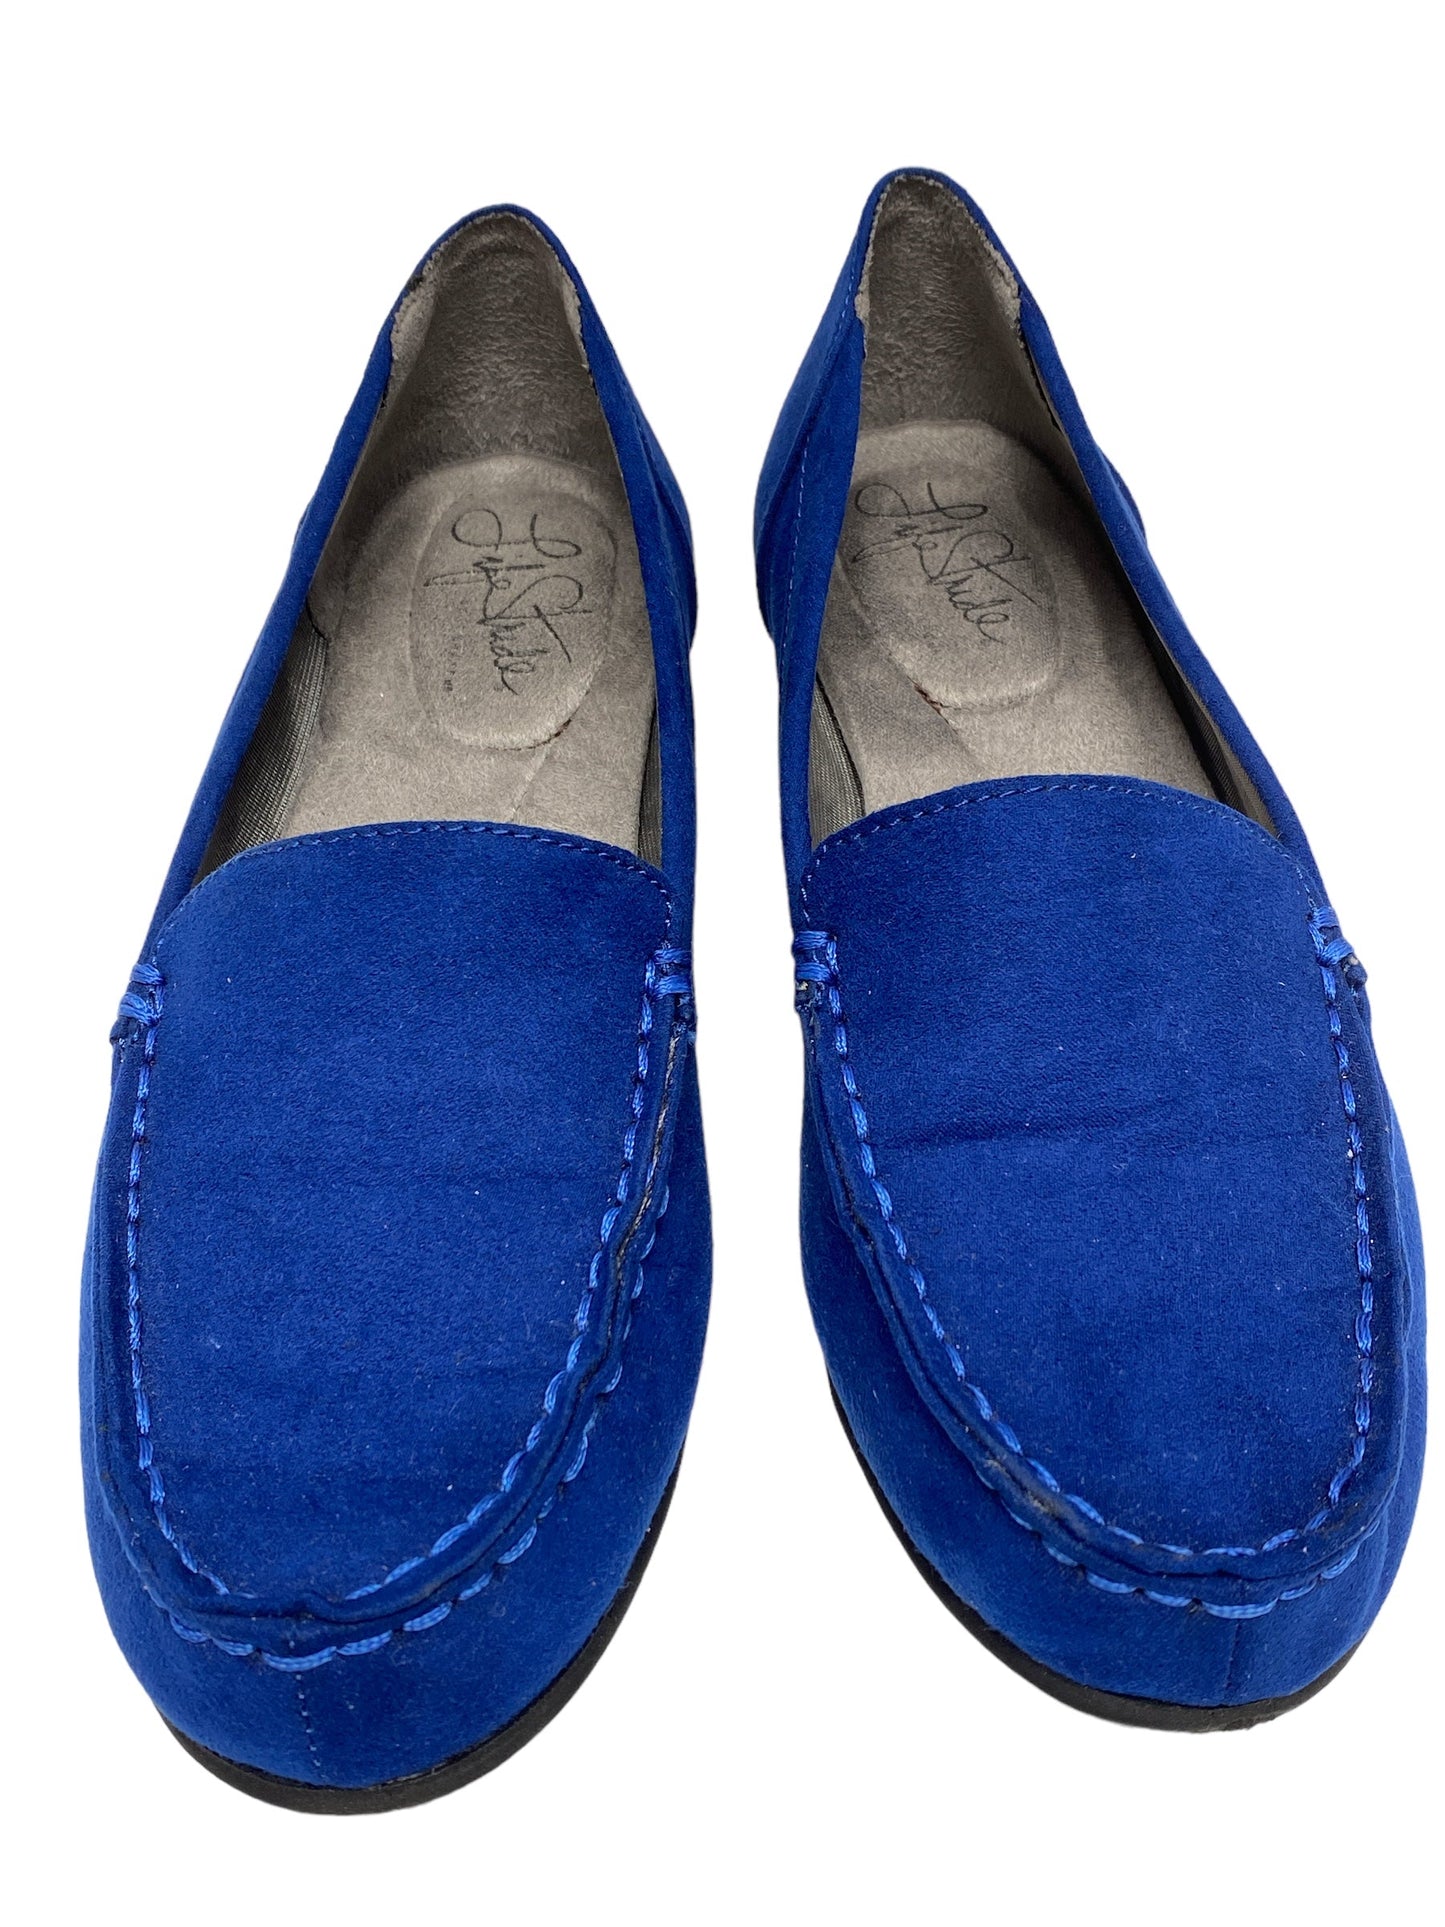 Shoes Flats Moccasin By Life Stride  Size: 6.5